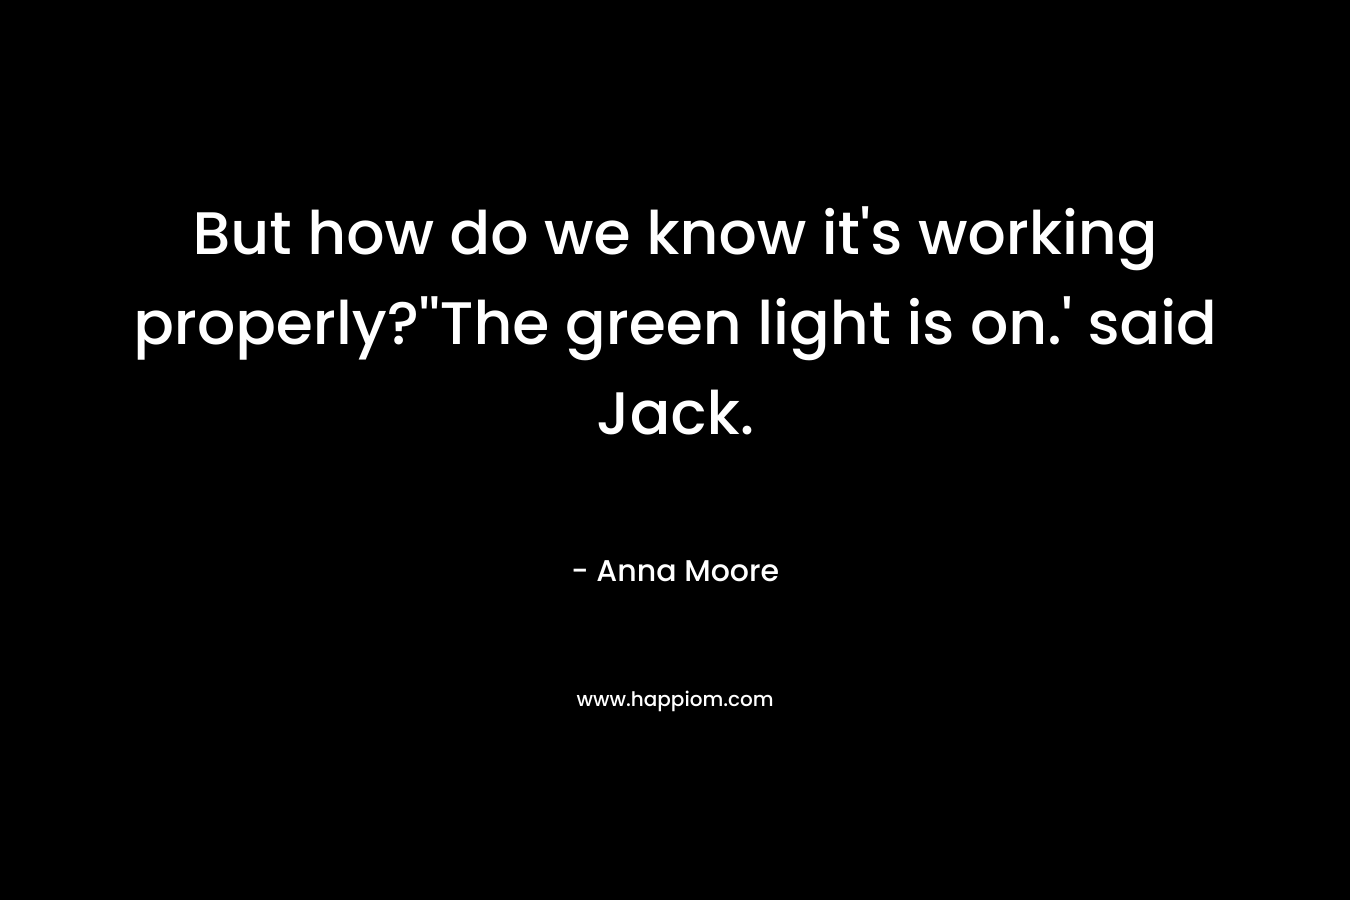 But how do we know it's working properly?''The green light is on.' said Jack.